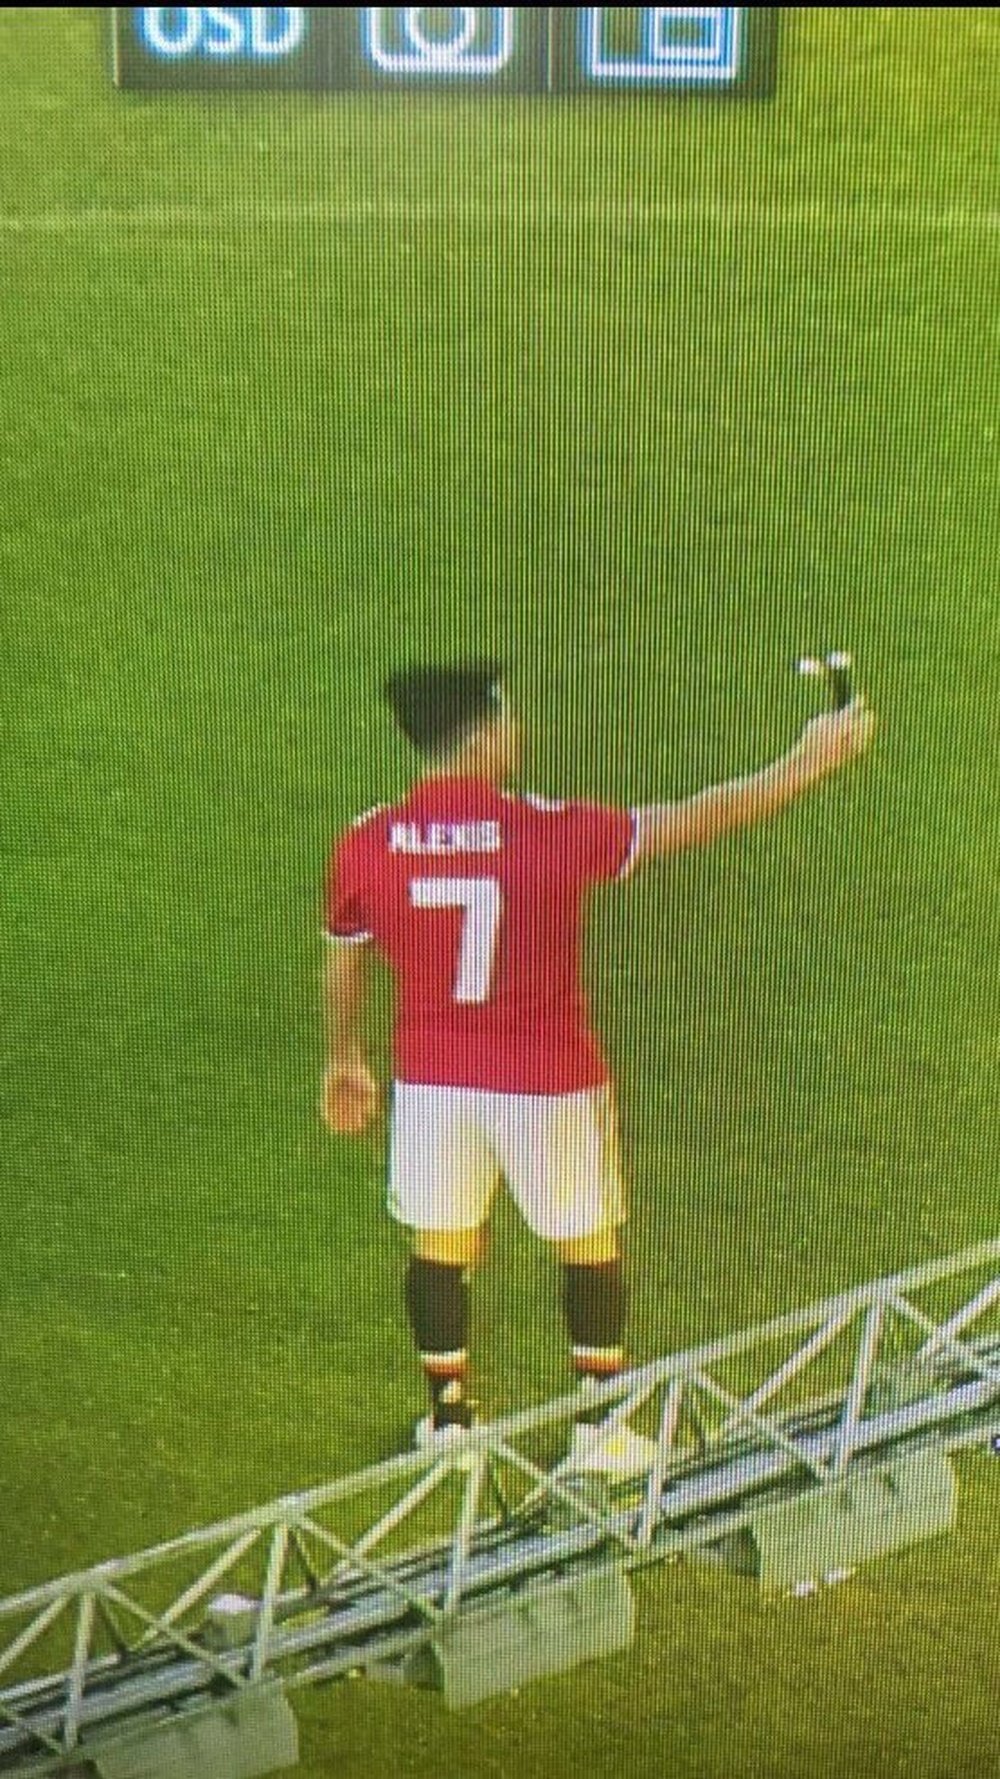 Sanchez was captured at Old Trafford wearing a United no.7 shirt. Twitter